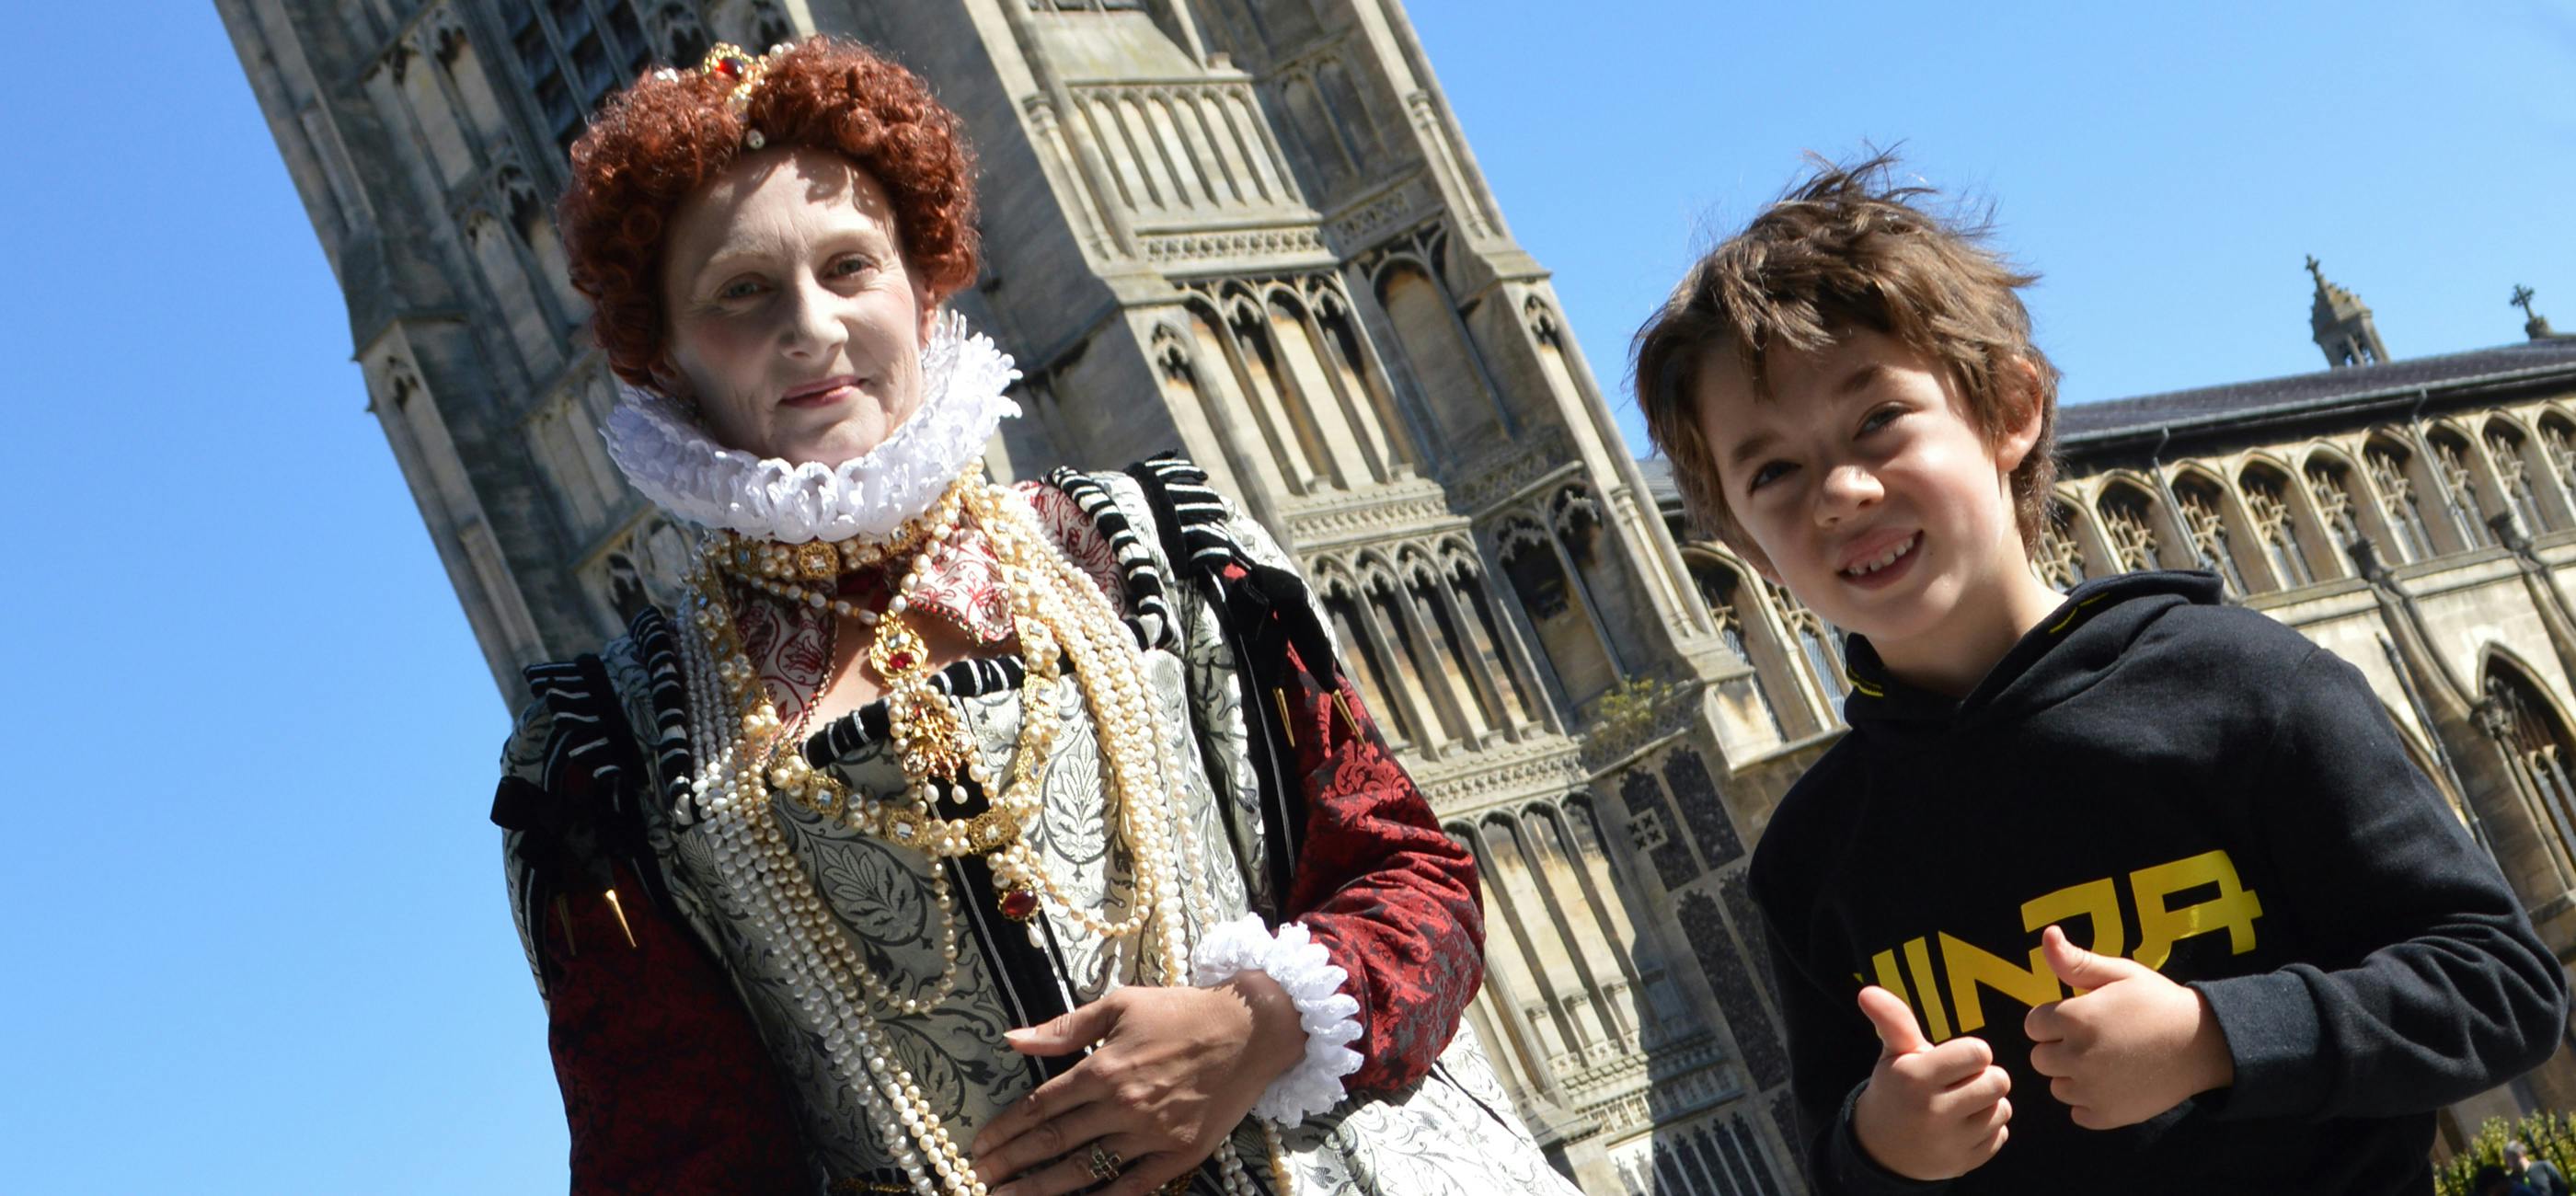 An actor dressed as Queen Victoria with ruff and pearls stands next to a child who is a history fan and has their thumbs up